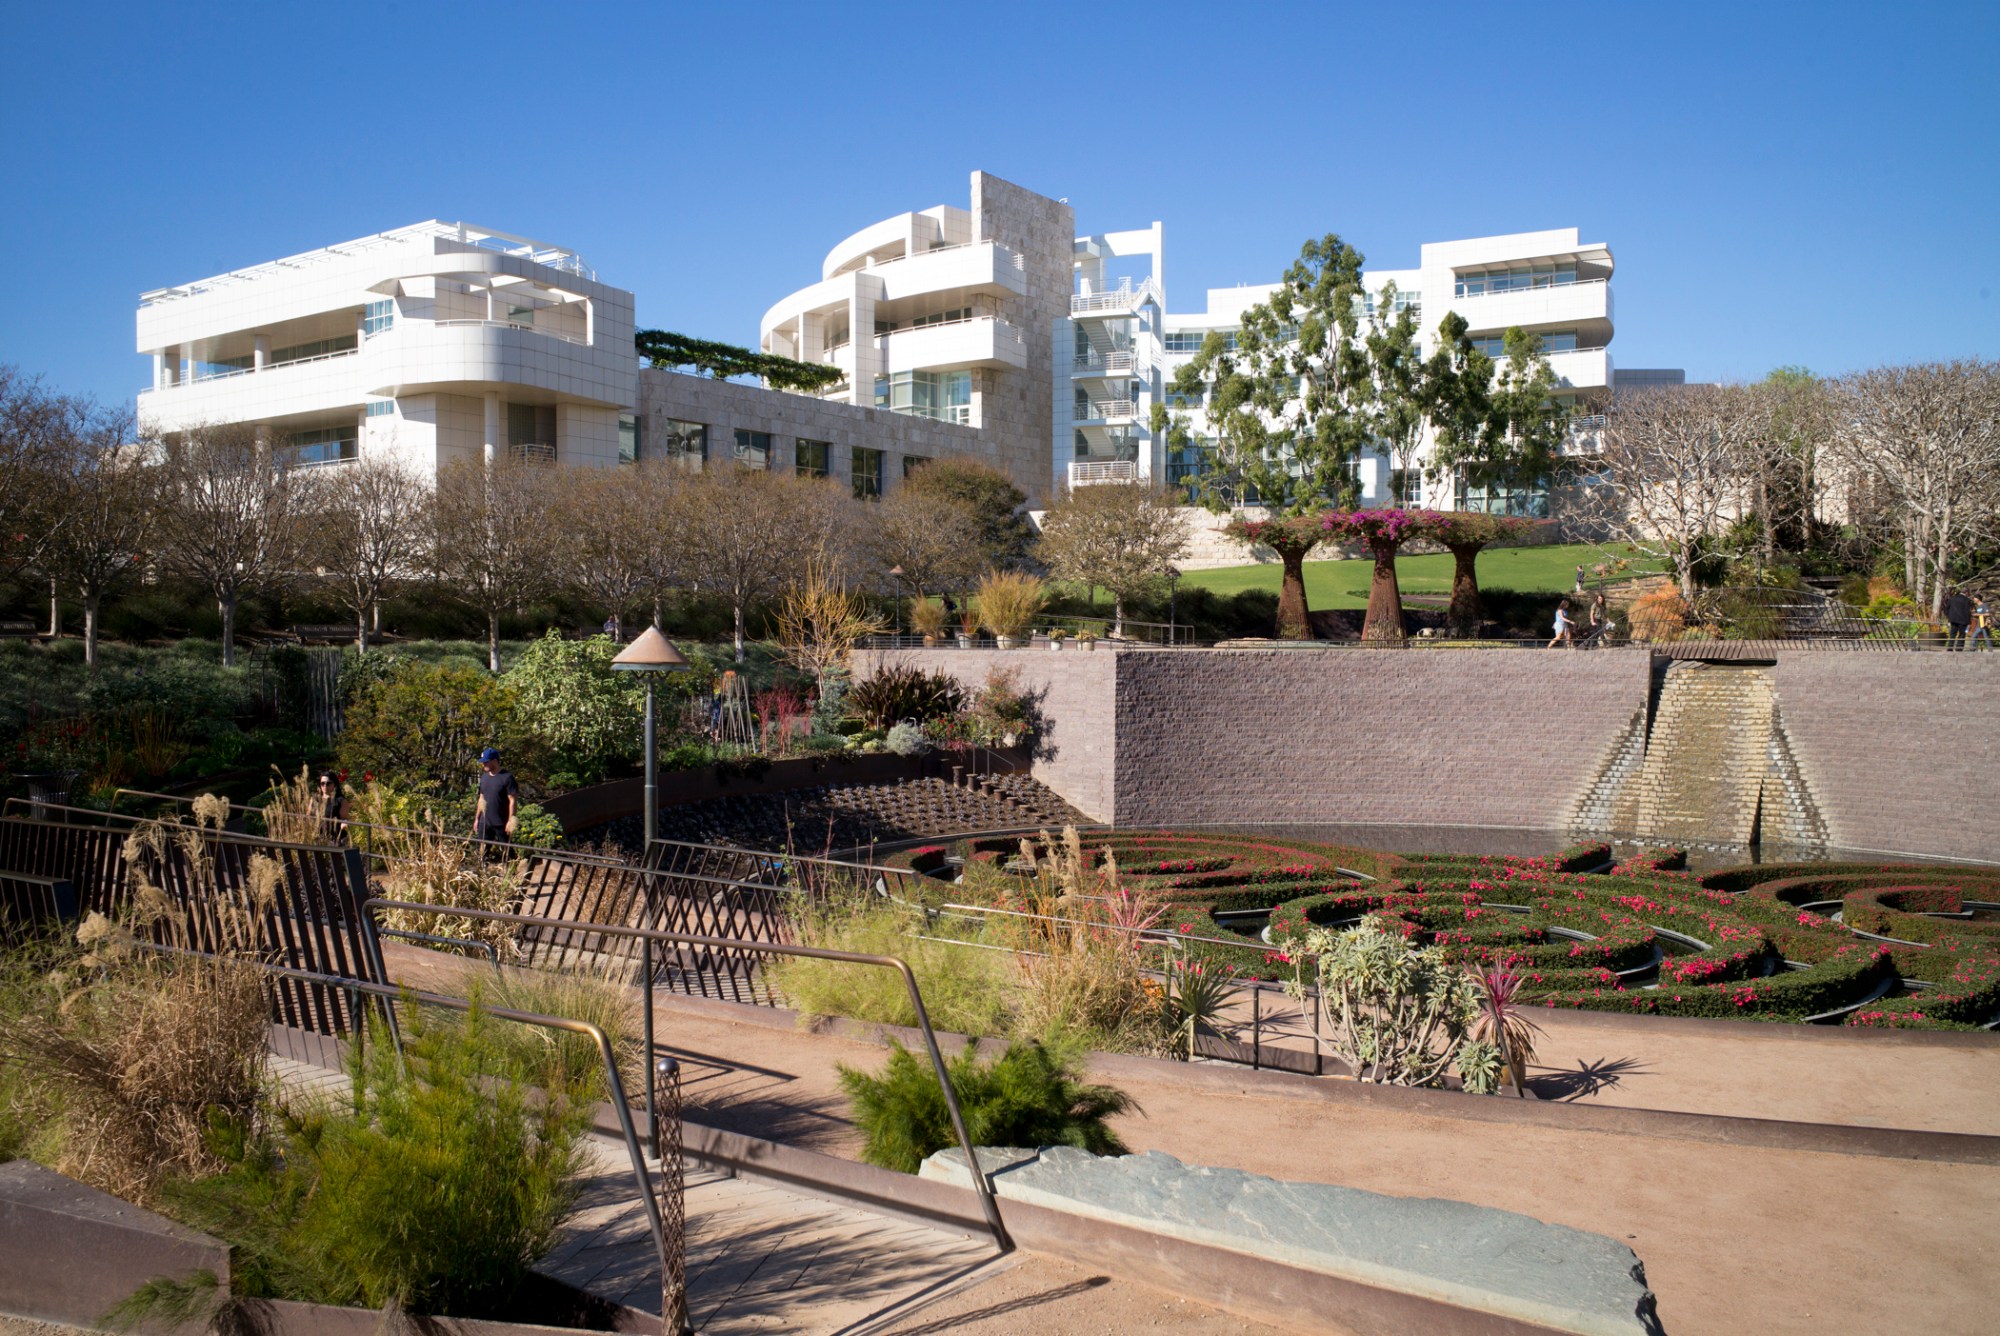 A view across the Getty Center's central garden. ( Photo by David Crane, Los Angeles Daily News/SCNG)